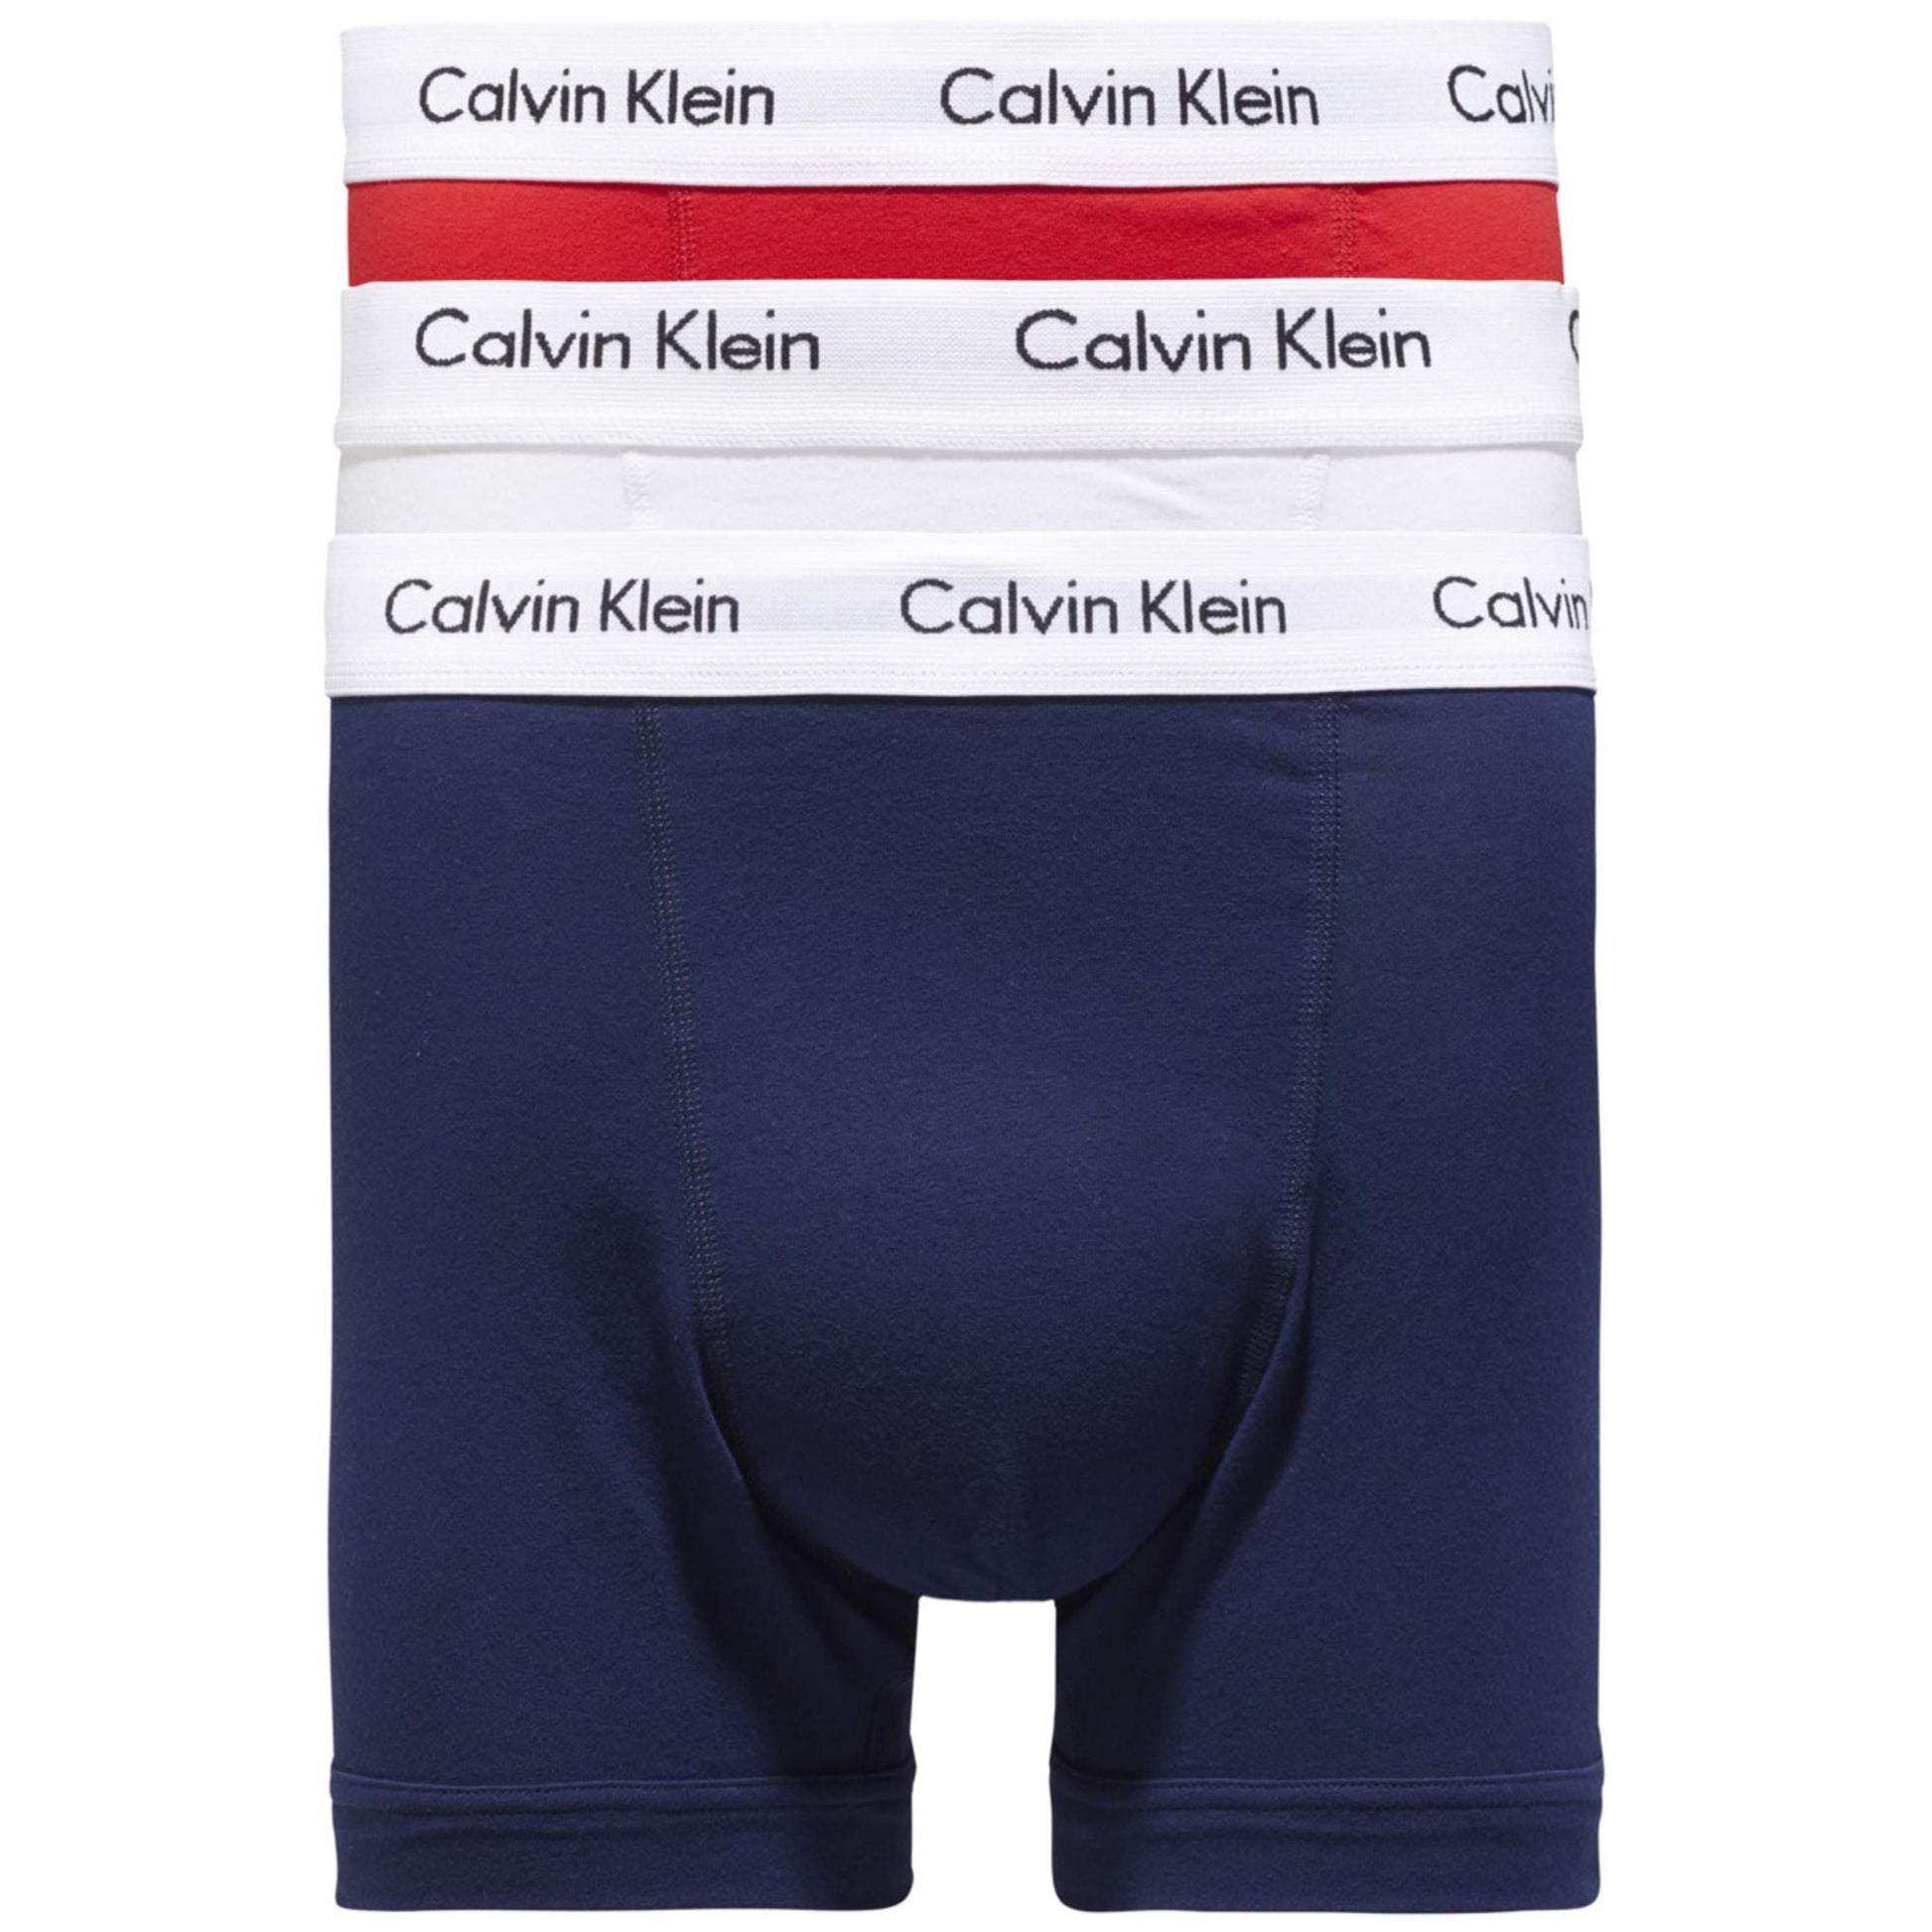 Calvin Klein 3 Pack Trunks Red White Blue with white waistband